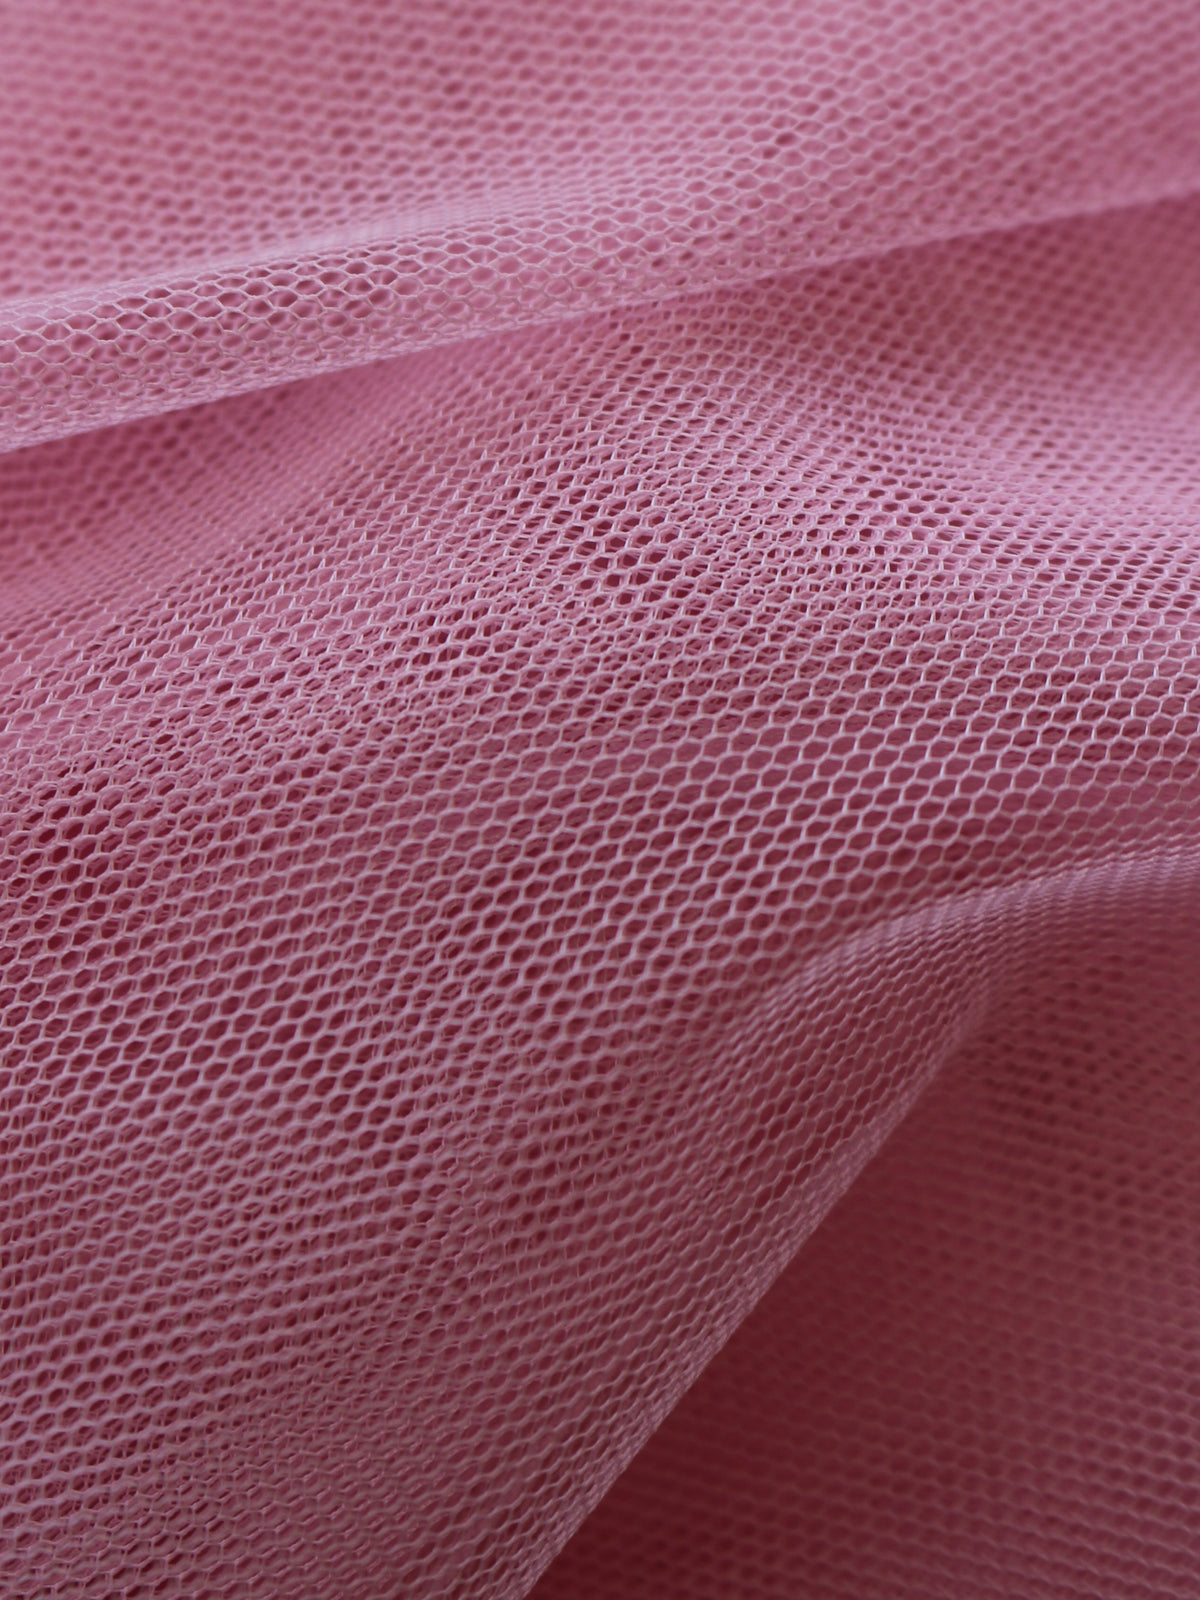 Rose Pink Tulle Dusty Pink Fabric, Dusty Pink Tulle, Sandy Pink Soft  Fabric, Stretch Mesh Fabric, Pink Tutu Tulle, Stretch Tulle, Pink Tulle 